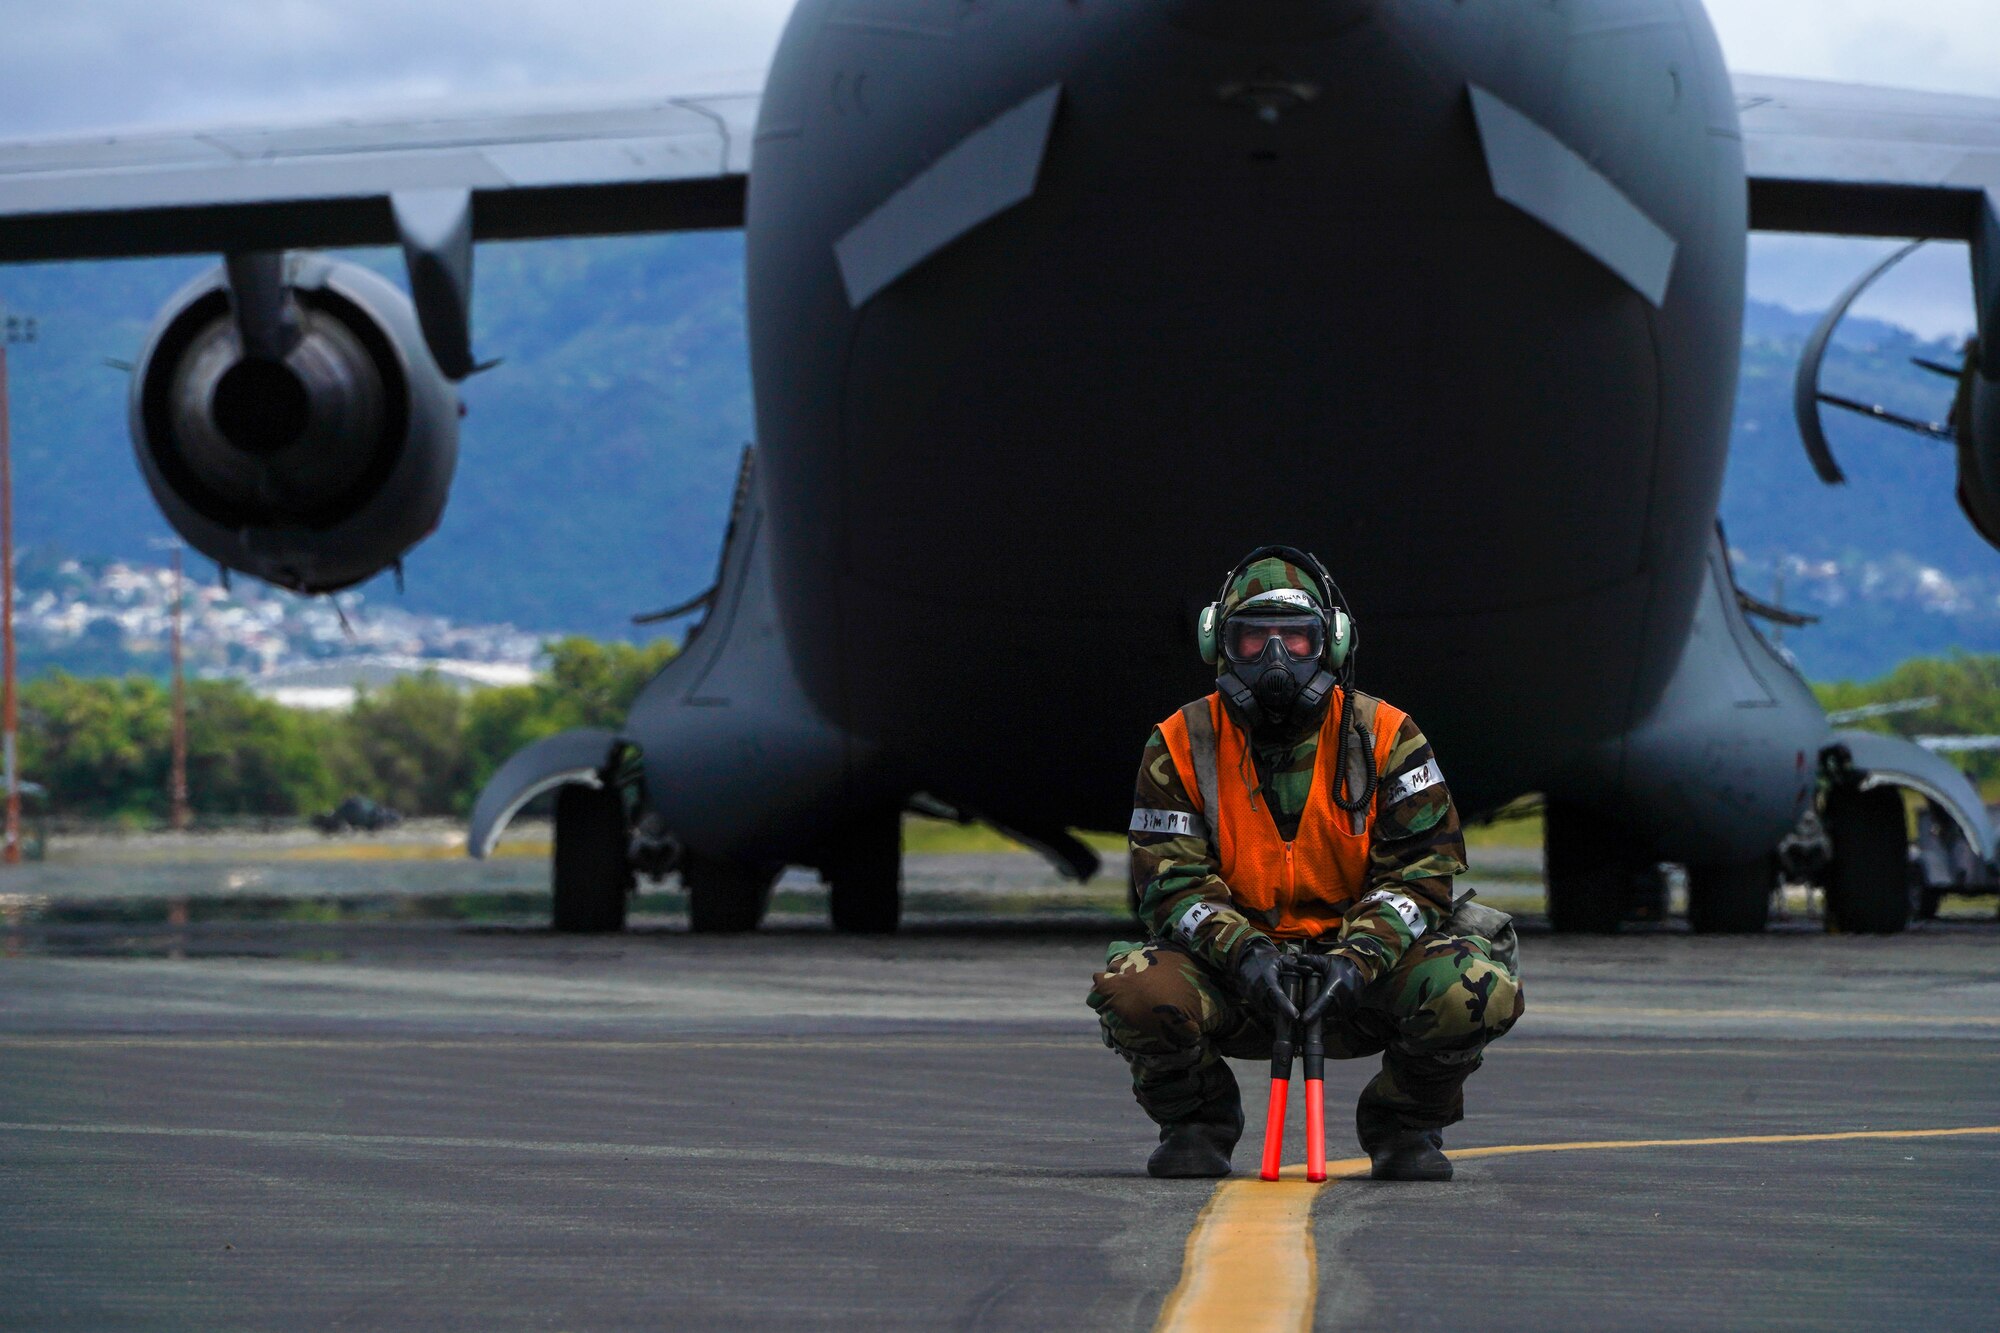 Airman 1st Class William Baldwin, 15th Aircraft Maintenance Squadron crew chief, prepares to marshal in a C-17 Globemaster III after landing at Hickam Airfield at Joint Base Pearl Harbor-Hickam, Hawaii March 8, 2022. After touchdown, aircraft are marshaled to their designated parking spot by crew chiefs. (U.S. Air Force photo by Airman 1st Class Makensie Cooper)